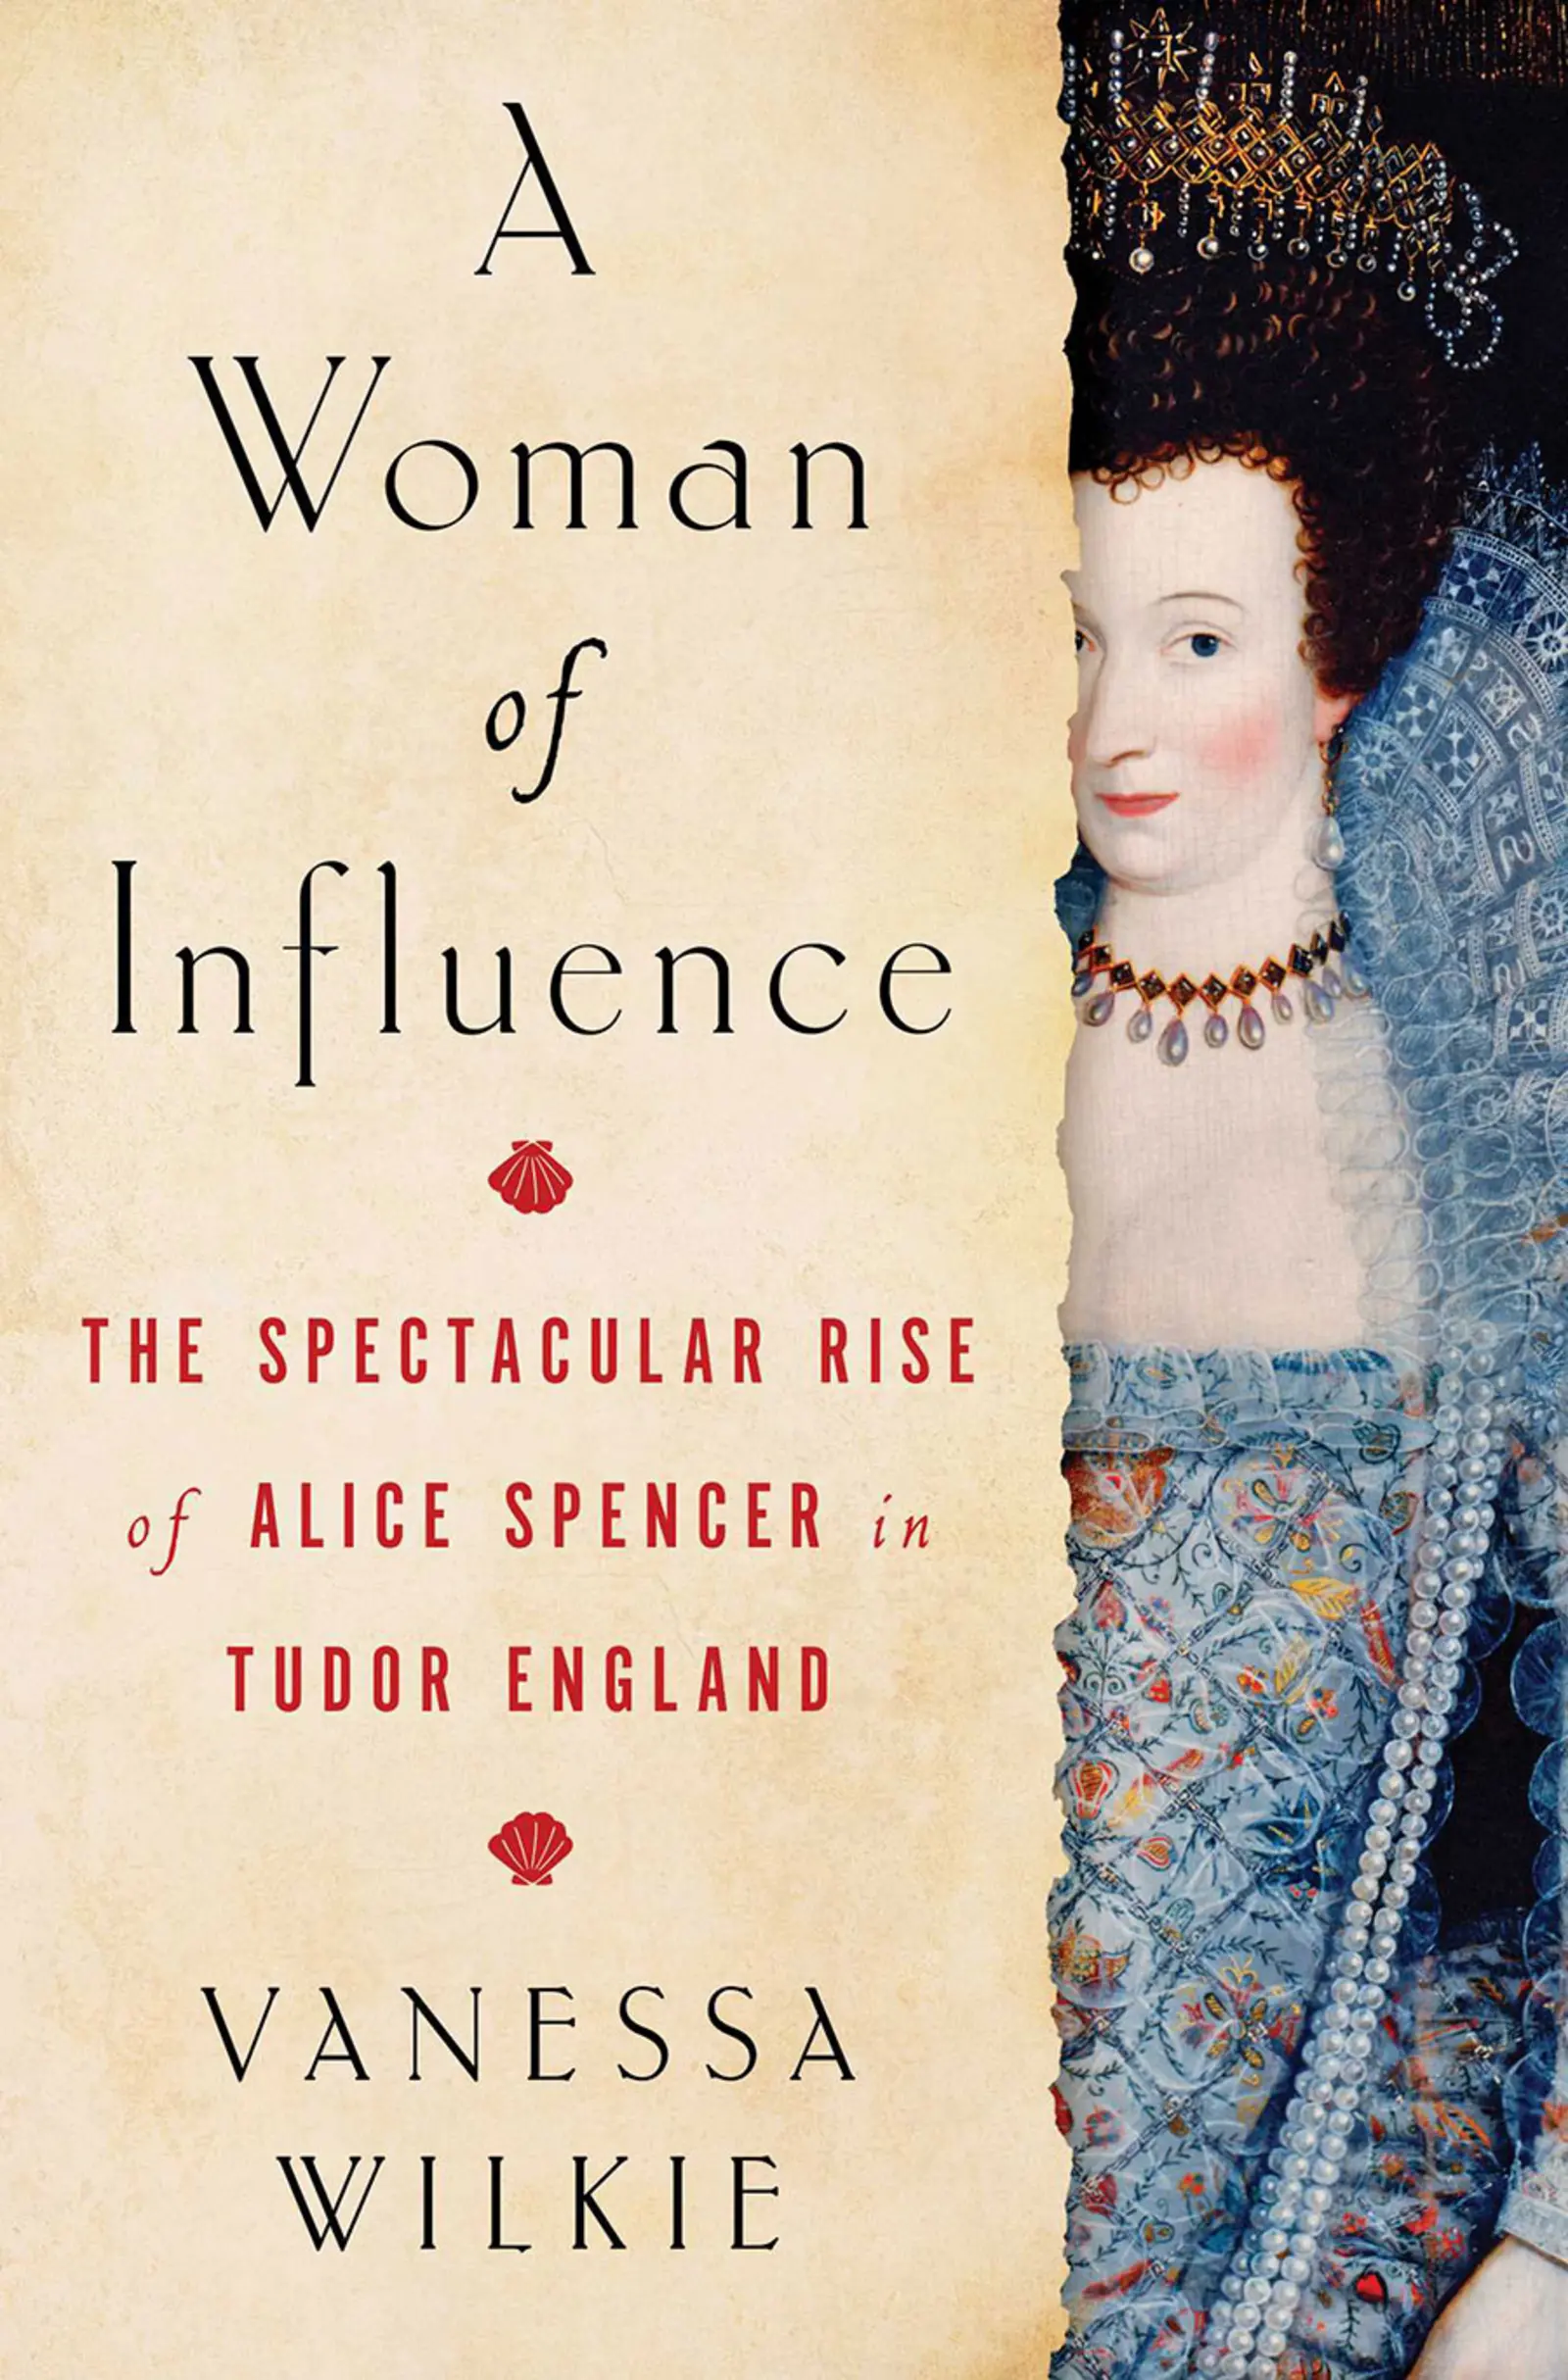 Book cover of Vanessa Wilkie's "A Woman of Influence"